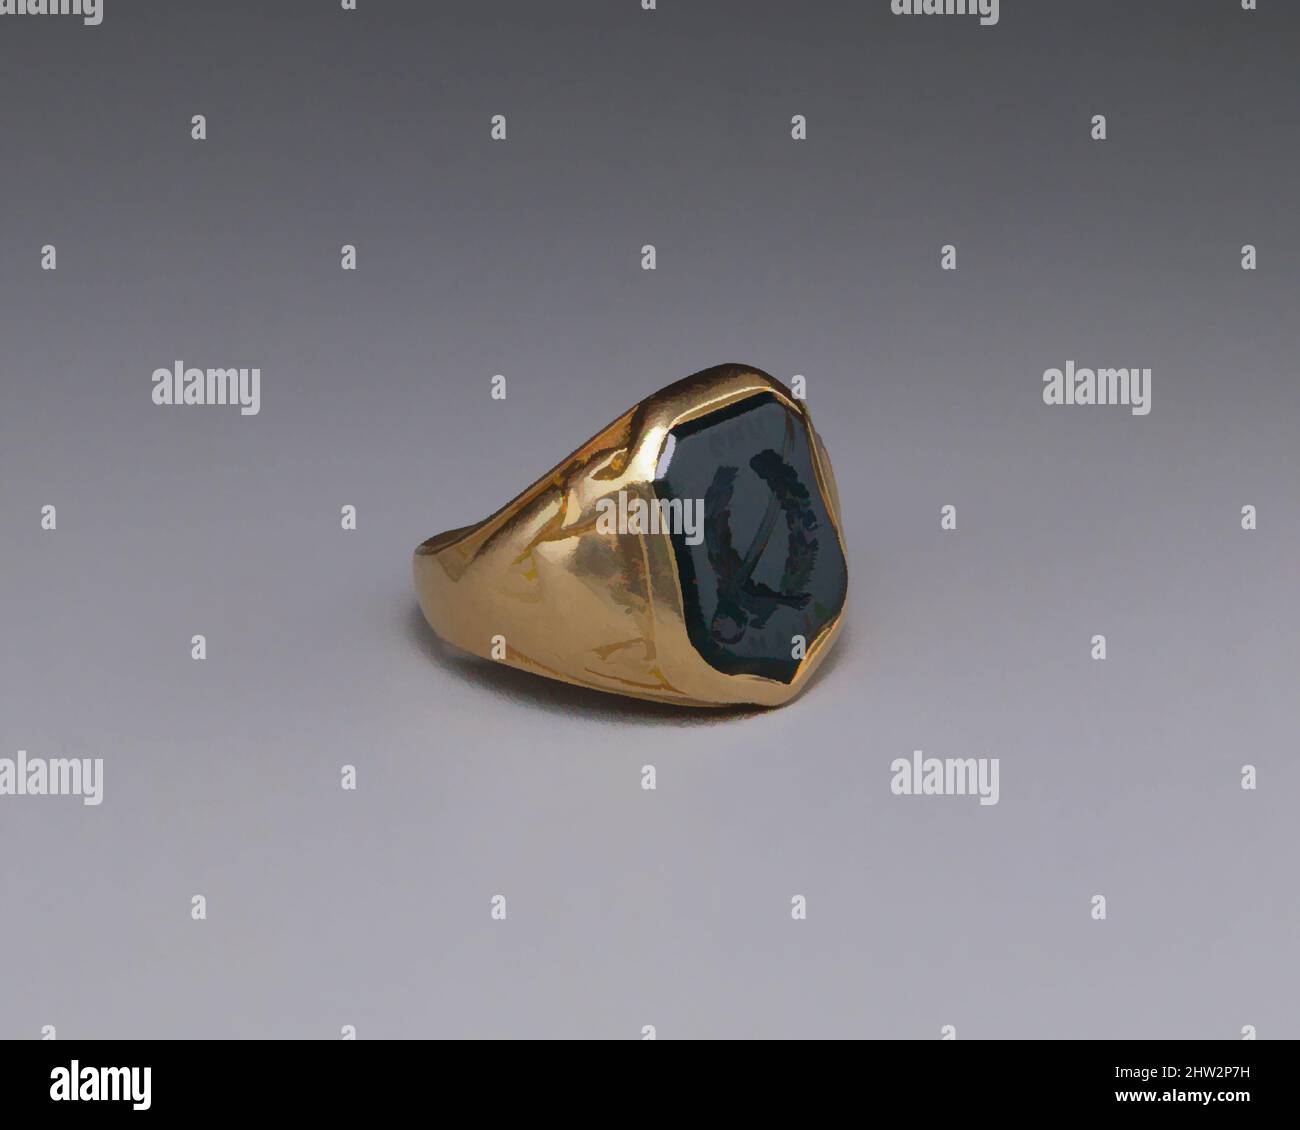 Art inspired by Signet Ring, 1864, Made in New York, New York, United States, American, Gold and bloodstone, L. 7/8 in. (2.2 cm), Diam. 13/16 in. (2.1 cm), Jewelry, Ball, Black & Co. (American, New York, 1851–1874), This class ring was made by prominent New York City jewelers, Ball, Classic works modernized by Artotop with a splash of modernity. Shapes, color and value, eye-catching visual impact on art. Emotions through freedom of artworks in a contemporary way. A timeless message pursuing a wildly creative new direction. Artists turning to the digital medium and creating the Artotop NFT Stock Photo